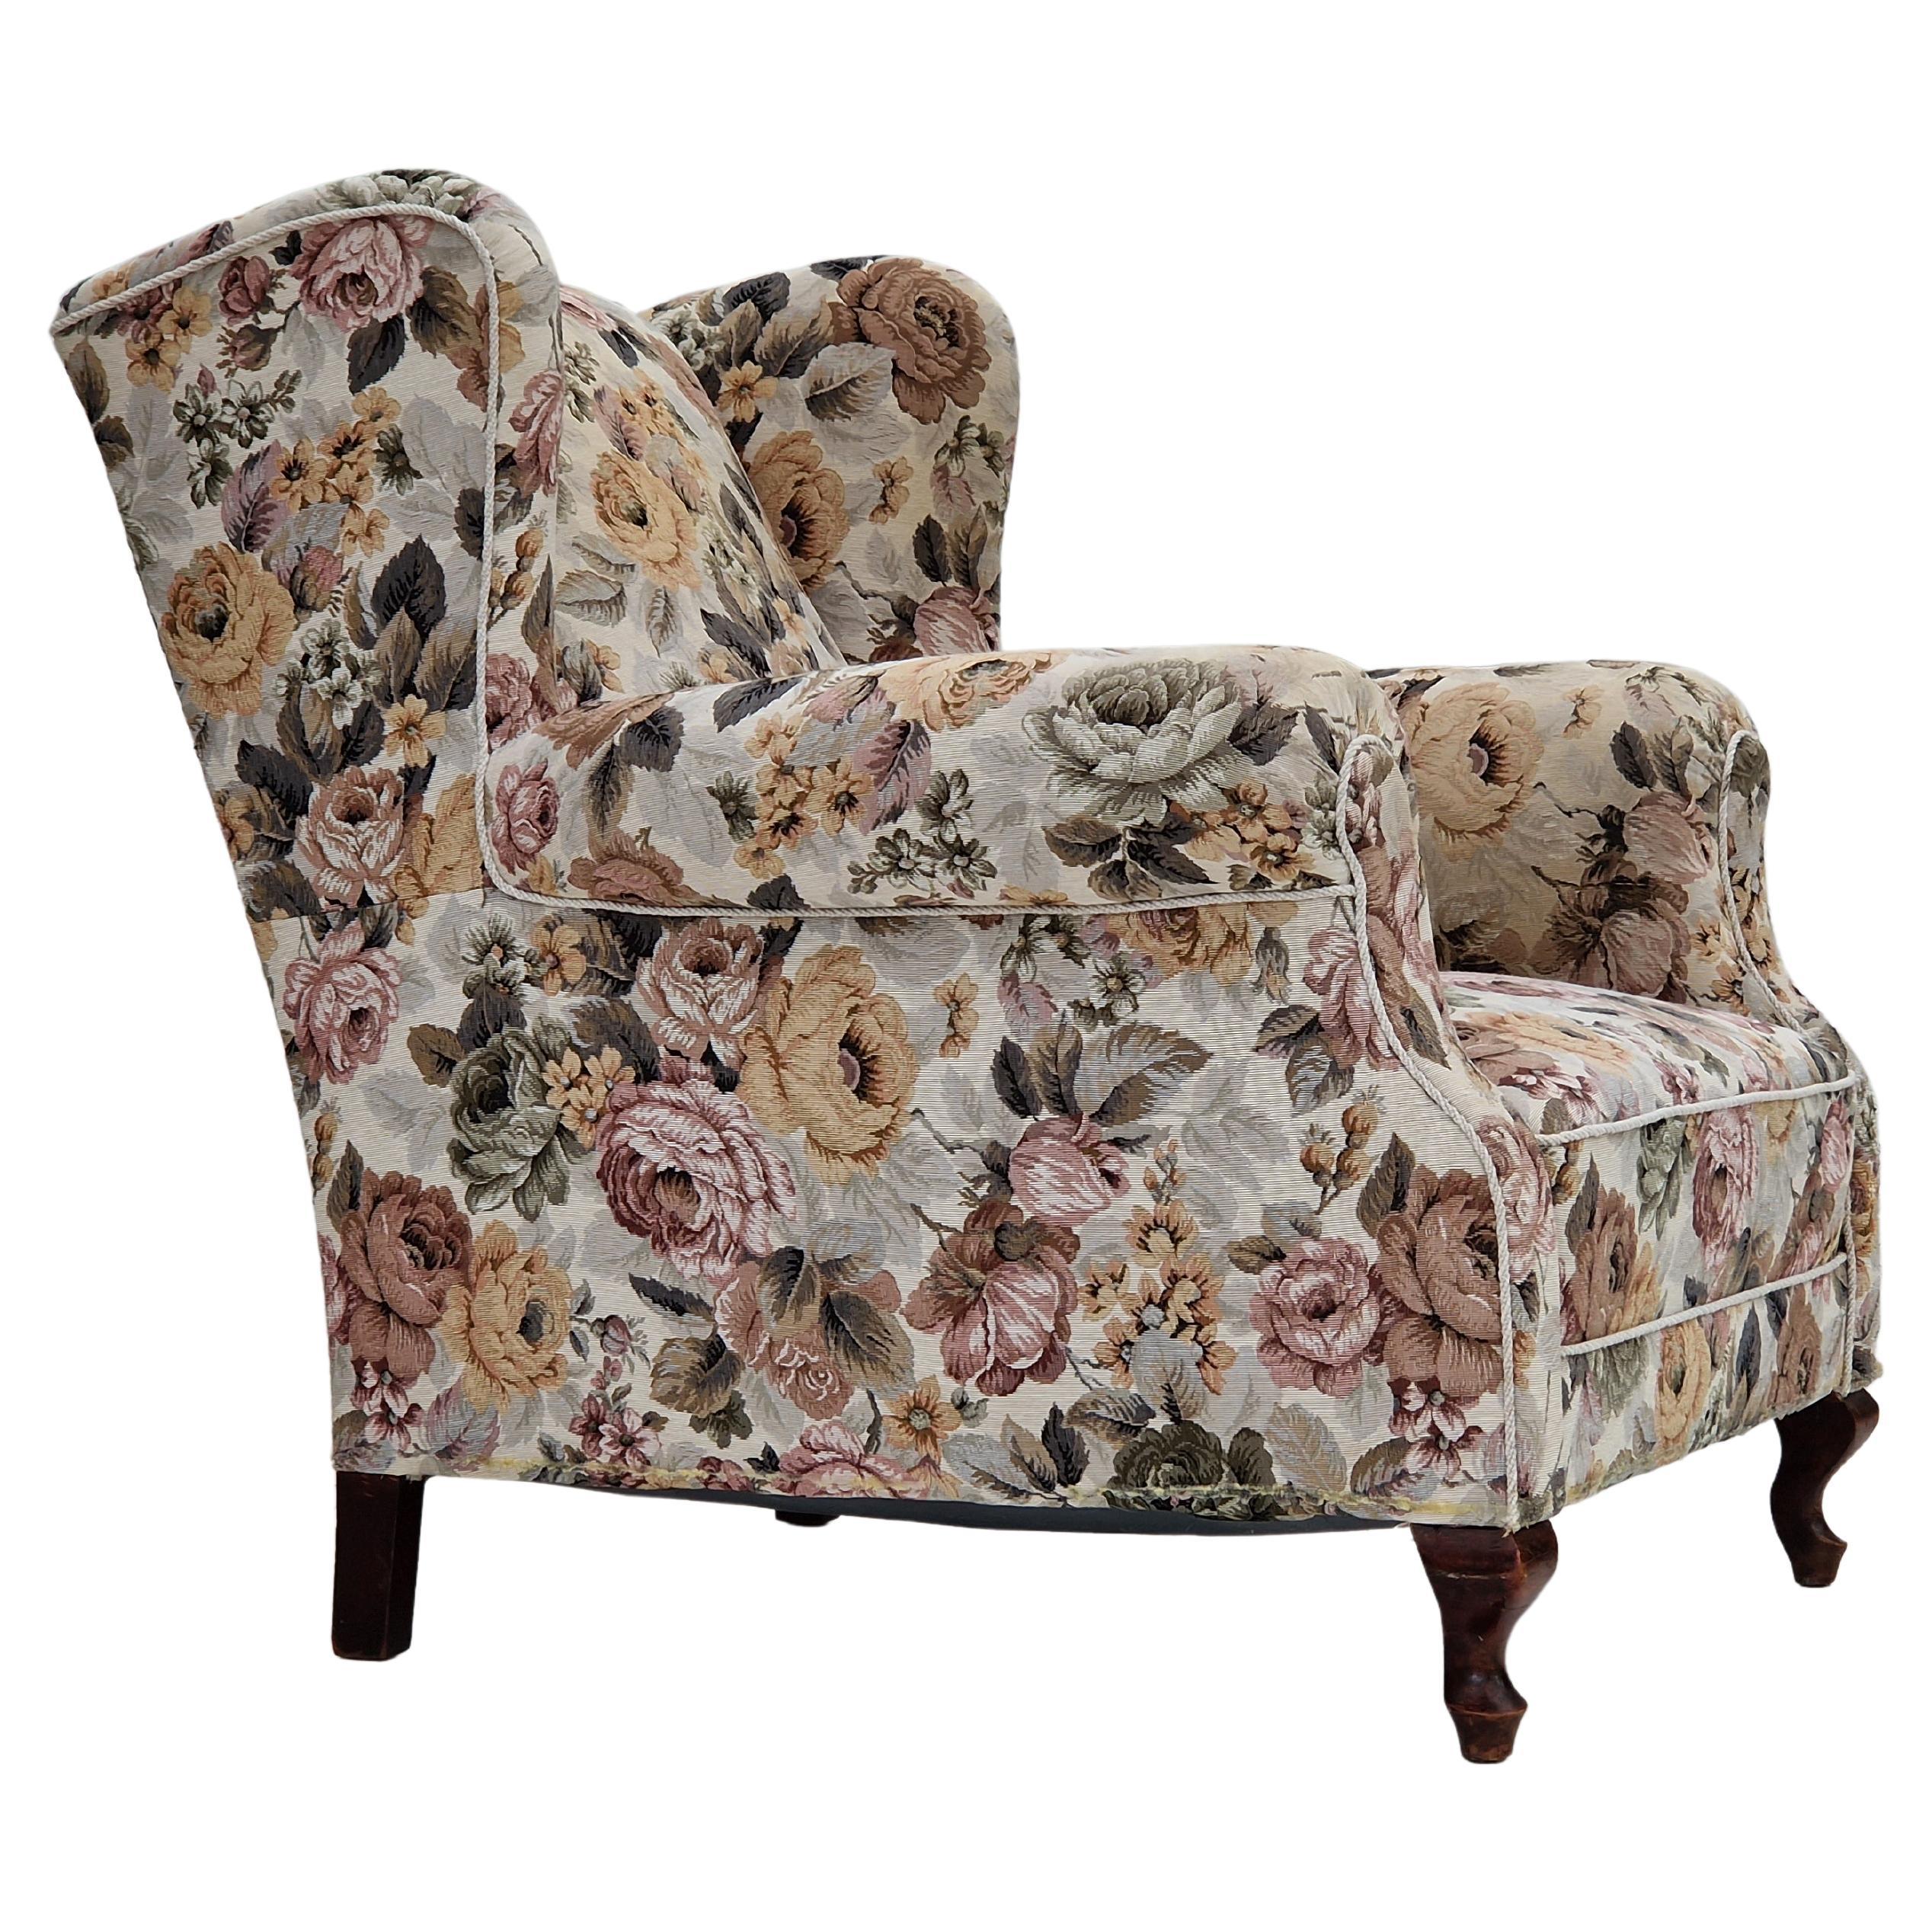 1950s, Danish vintage relax chair in "flowers" fabric, original condition. For Sale